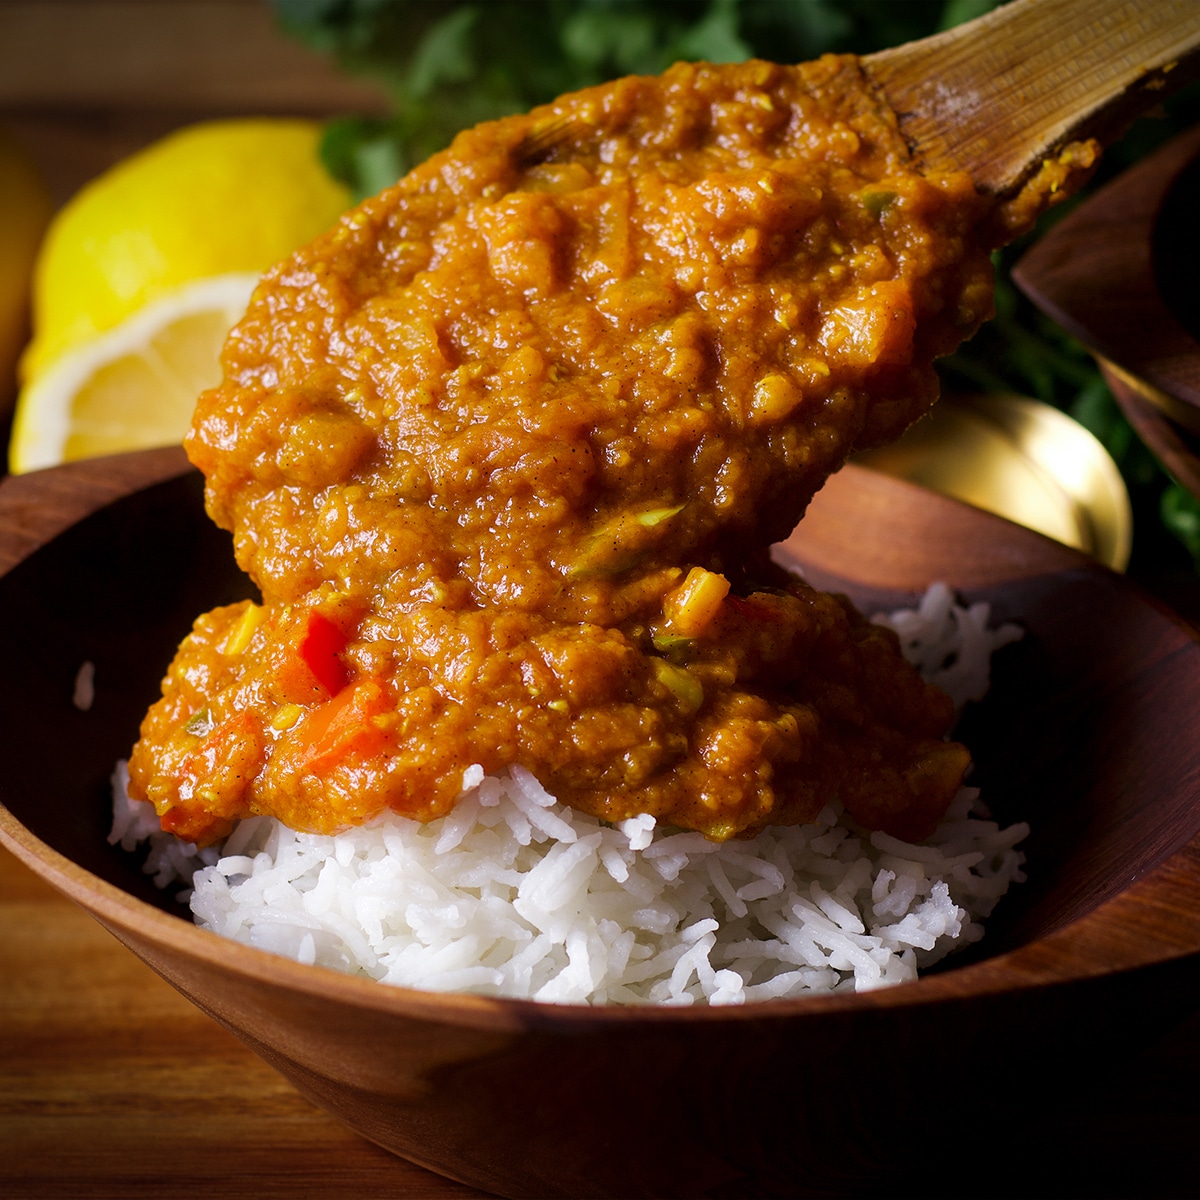 Spooning red lentil dal over a bowl filled with white rice.